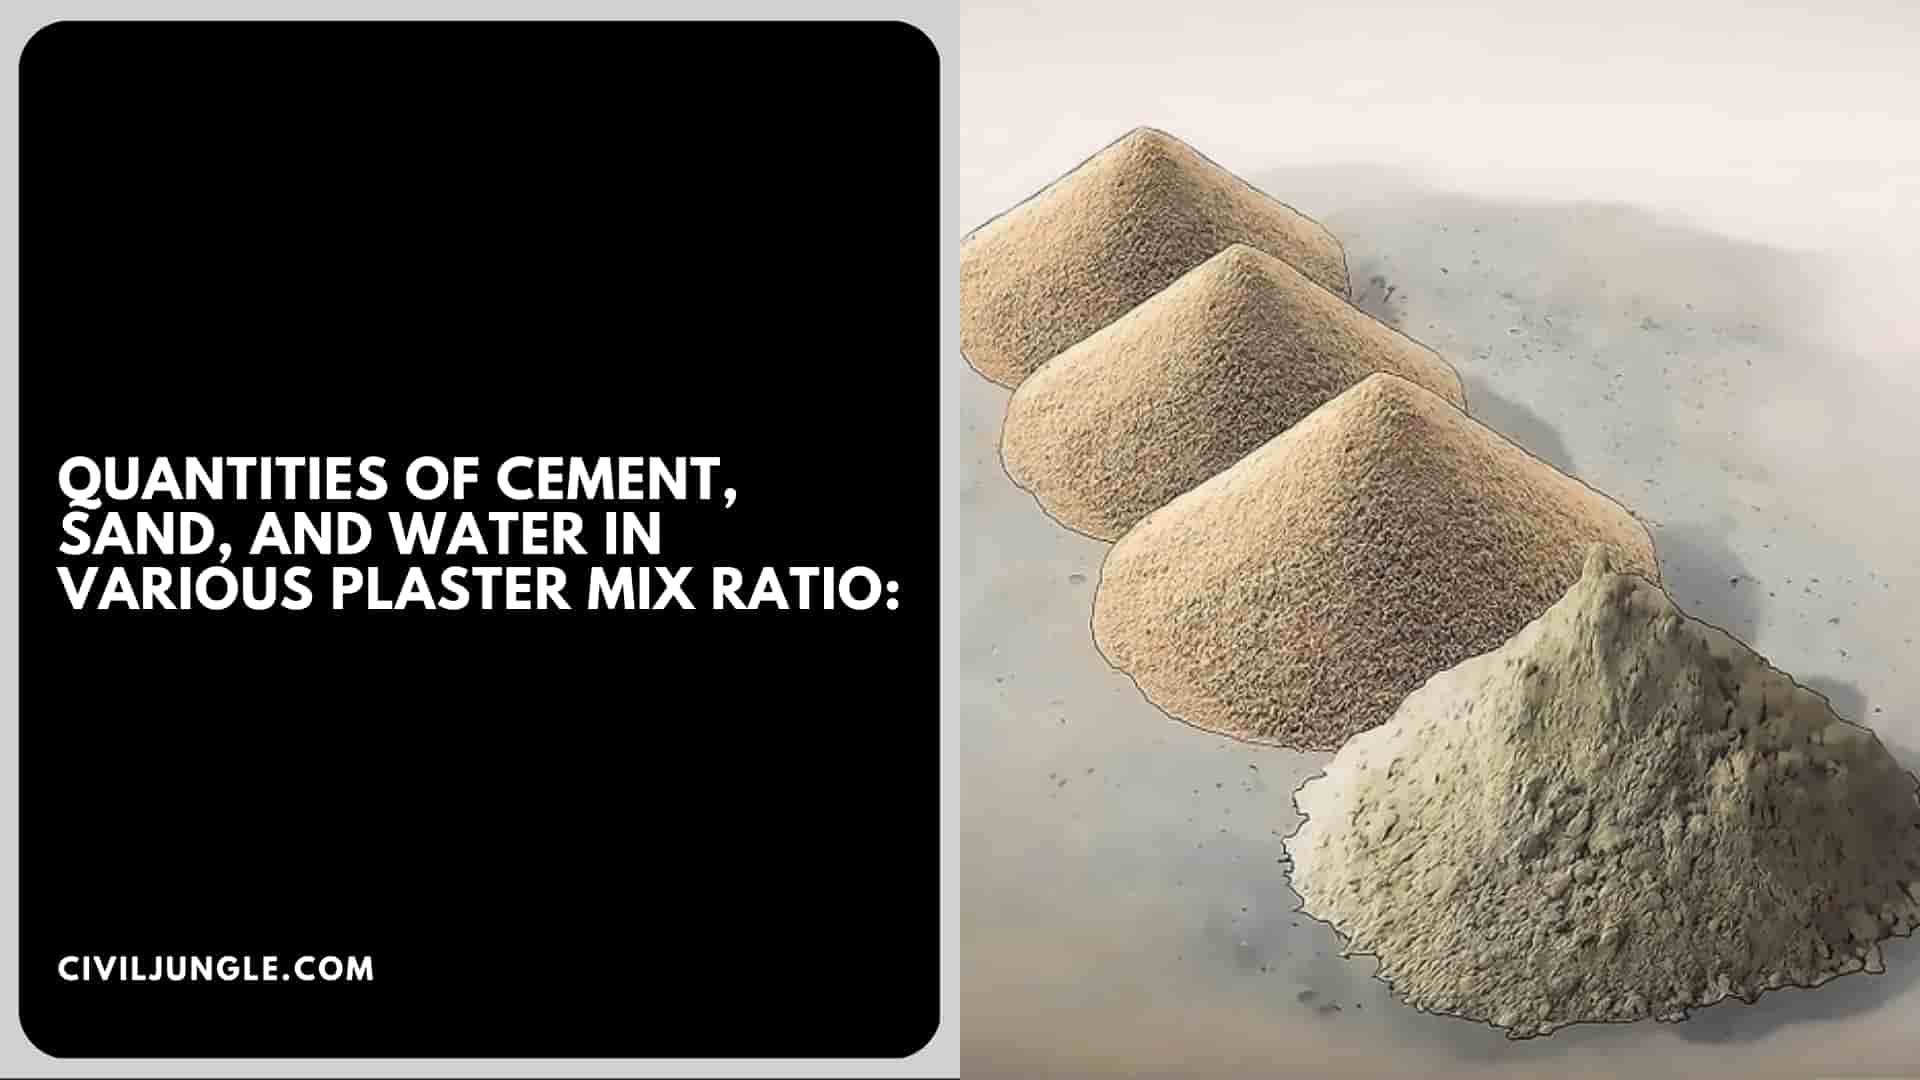 Quantities Of Cement, Sand, And Water In Various Plaster Mix Ratio